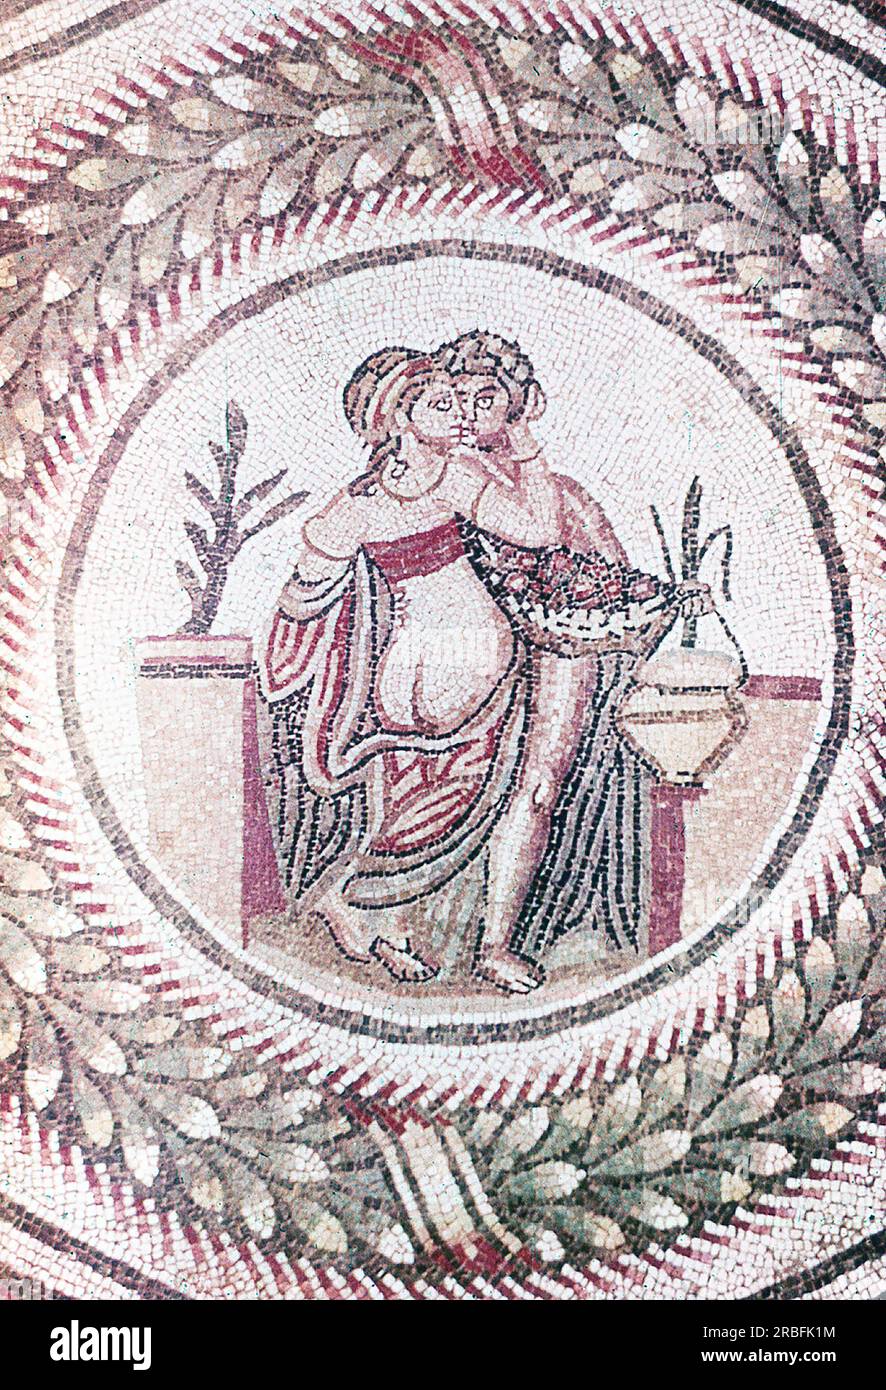 This photo of a mosaic showing a detail from a bedroom scene was taken in the summer of 1970 at Piazza Armerina in Sicily. Piazza Armerina is home to the Roman Villa del Casale and its famous mosaics, the 'finest mosaics in situ anywhere in the Roman world,' as described by UNESCO, which inserted it into its World Heritage list in 1997. Villa Romana was a lavish patrician residence built at the center of a huge latifundium (agricultural estate) at the end of the 4th century AD. It is thought to have belonged to a member of the Roman senatorial aristocracy, who traded in exotic animals.  The vi Stock Photo